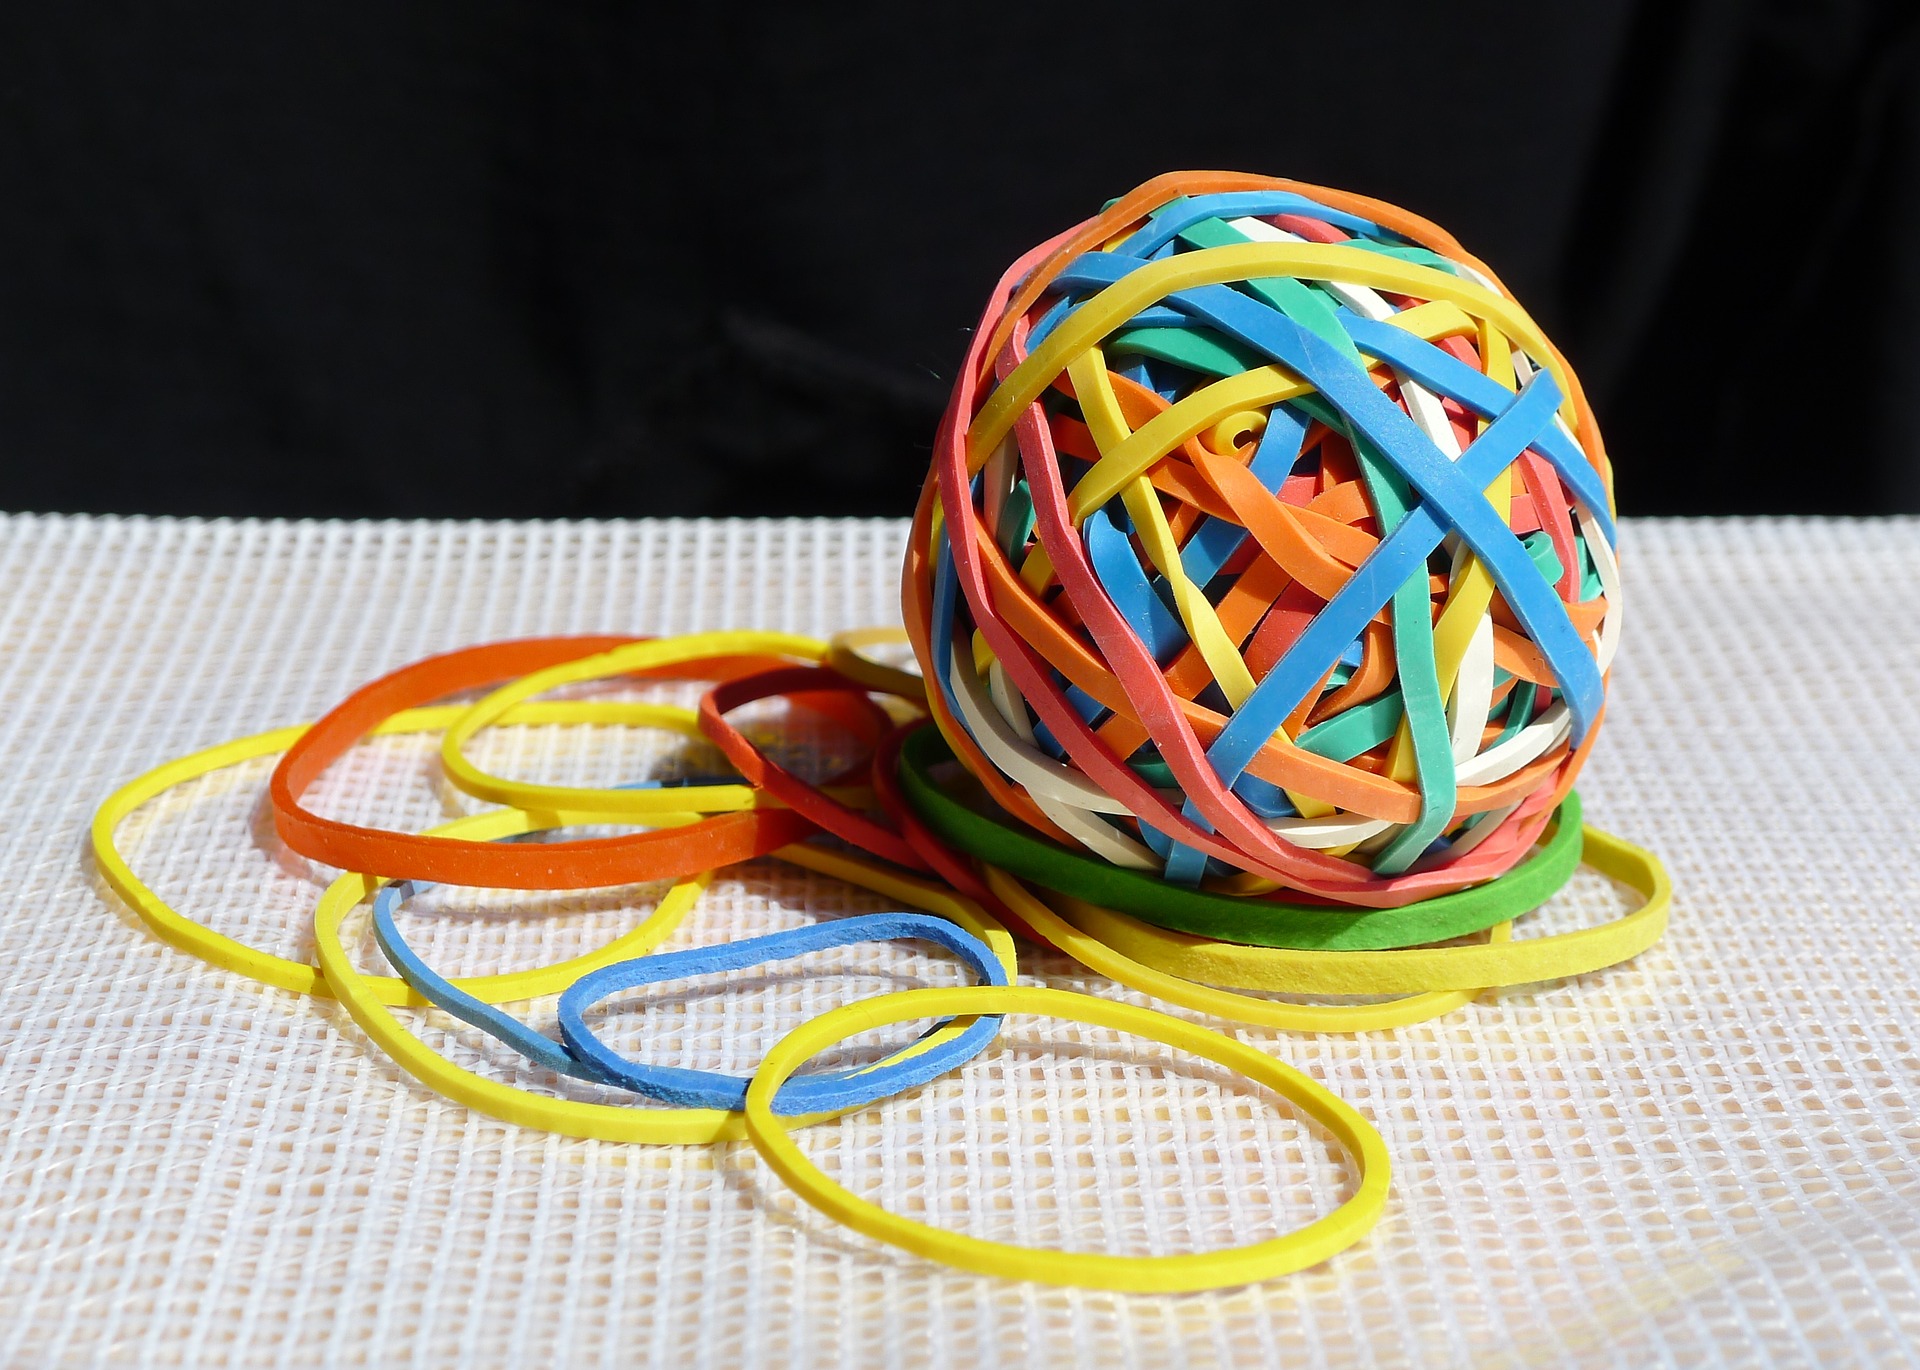 (From Pixabay) This is a picture of rubber bands. I did not want to put a photo of me because it might be too freaky as a cover photo.